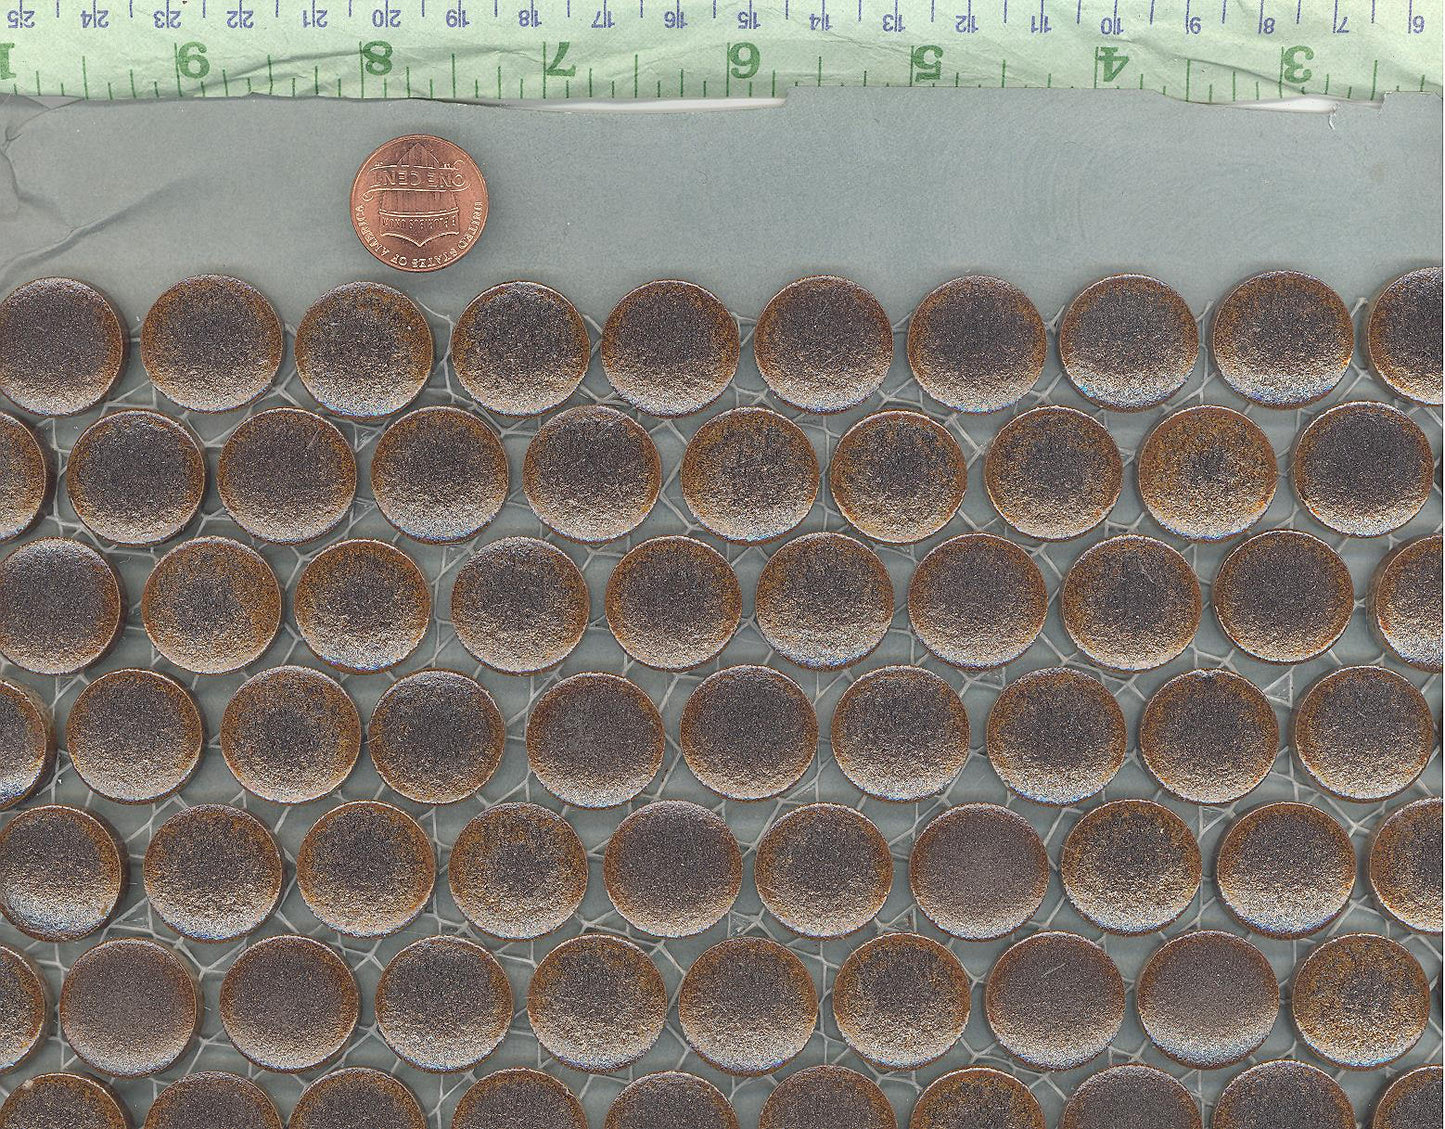 Bronze Ceramic Tiles - Round Mosaic Tiles - 2 cm or .75 inch - 25 Tiles - Penny Rounds